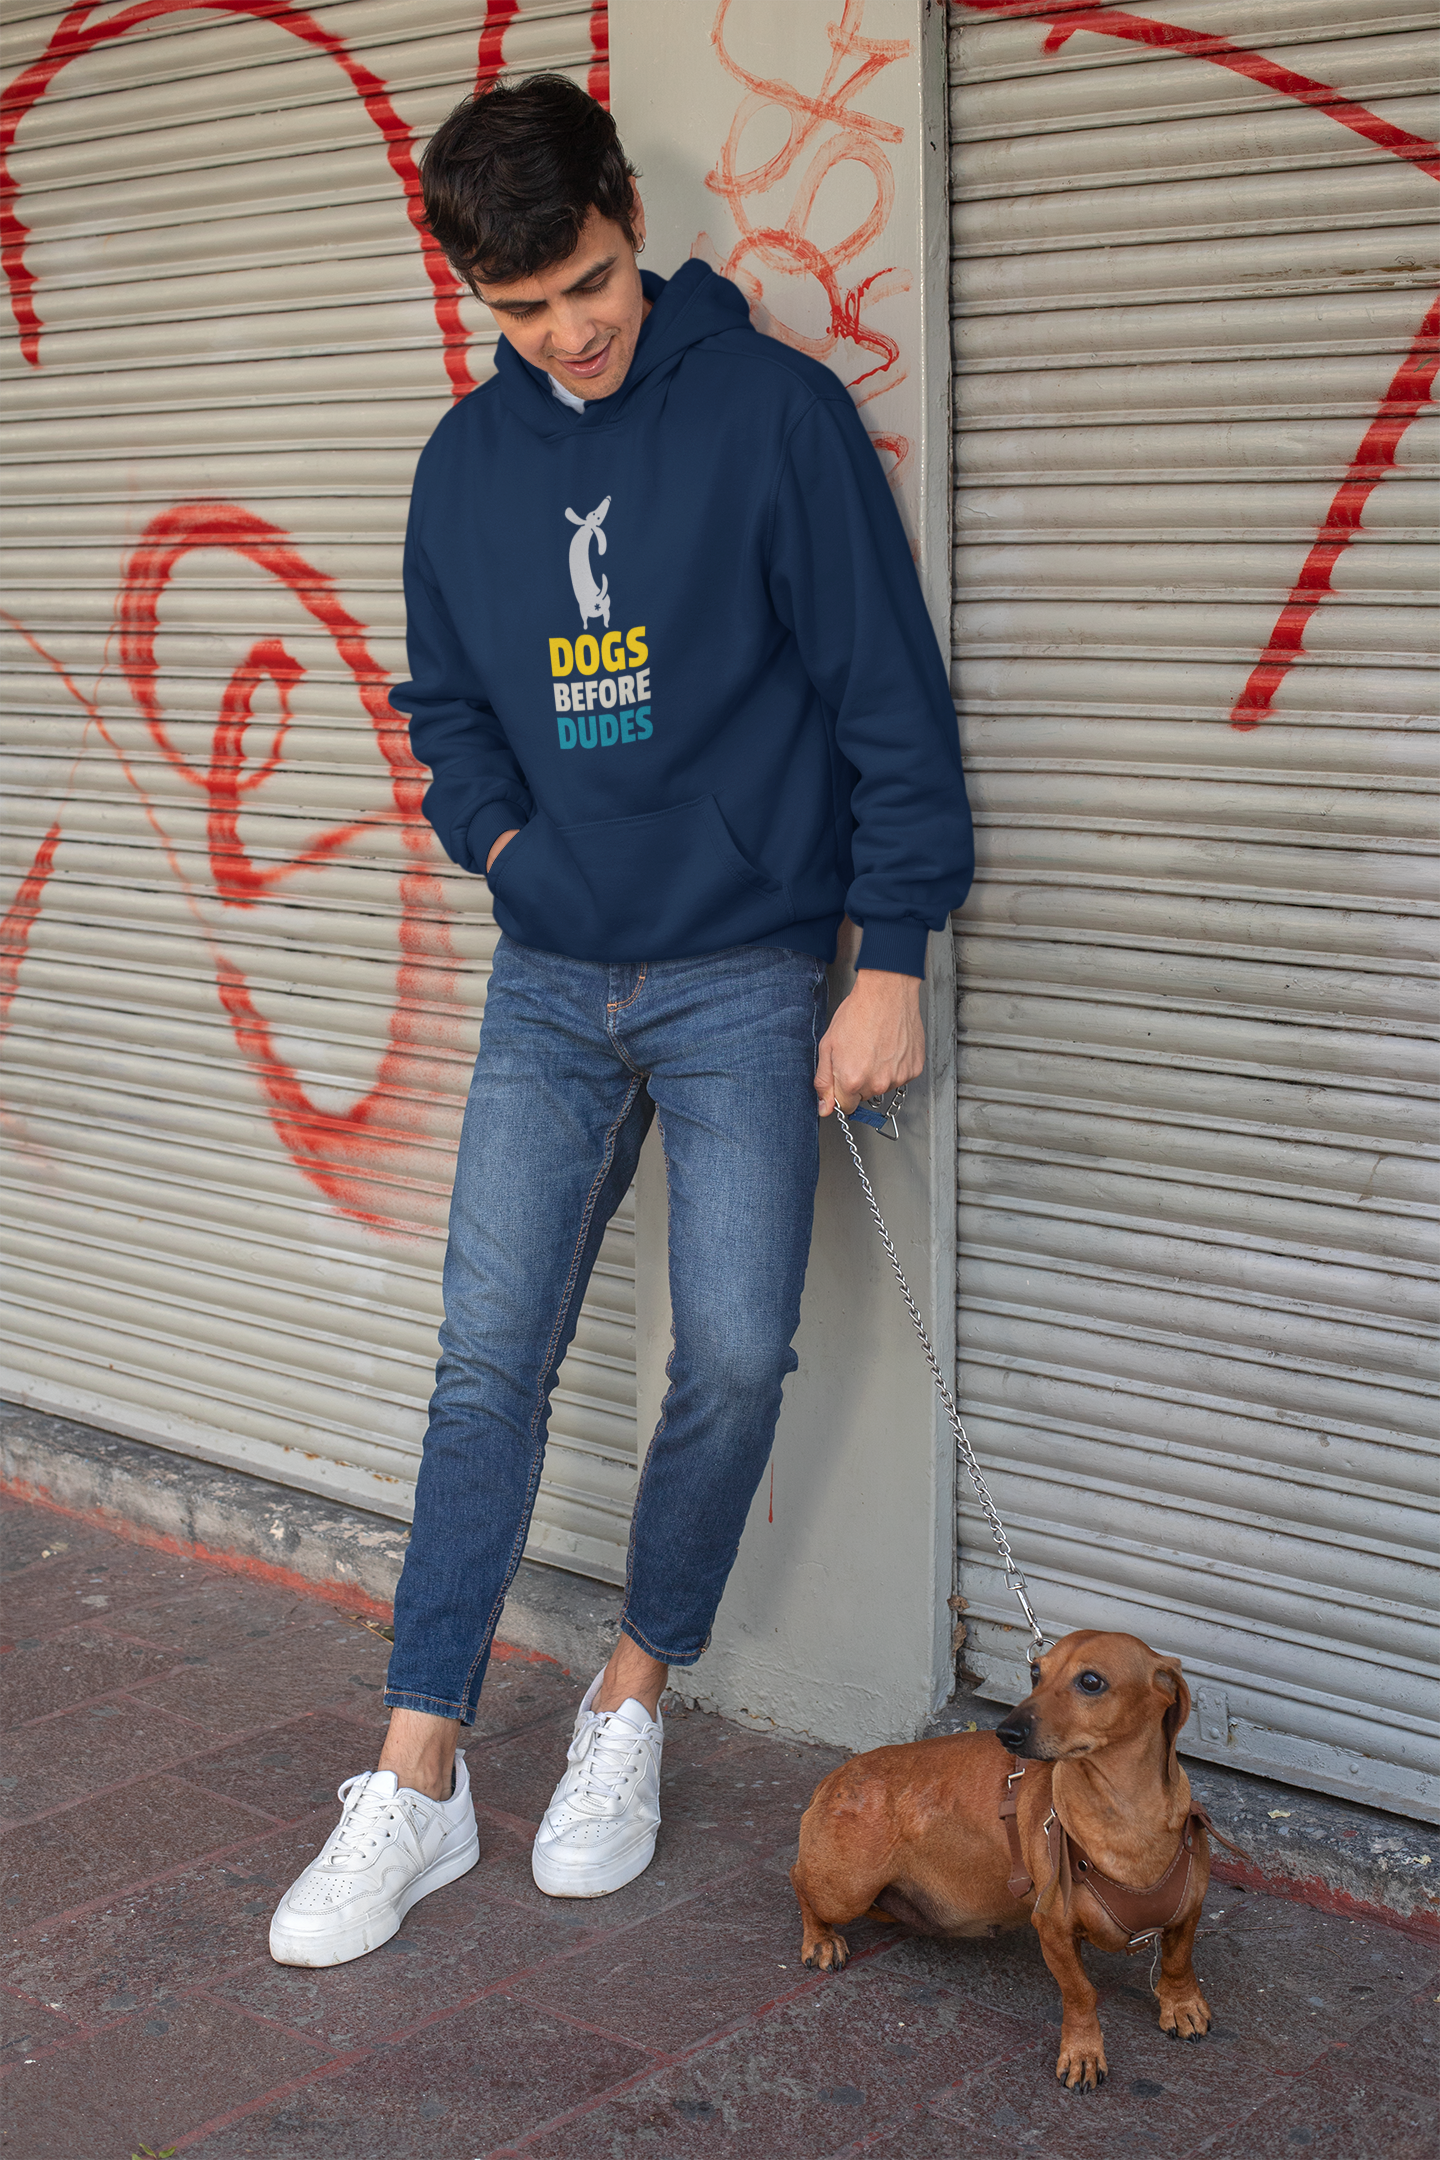 "DOGS BEFORE DUDES "- WINTER HOODIES NAVY BLUE